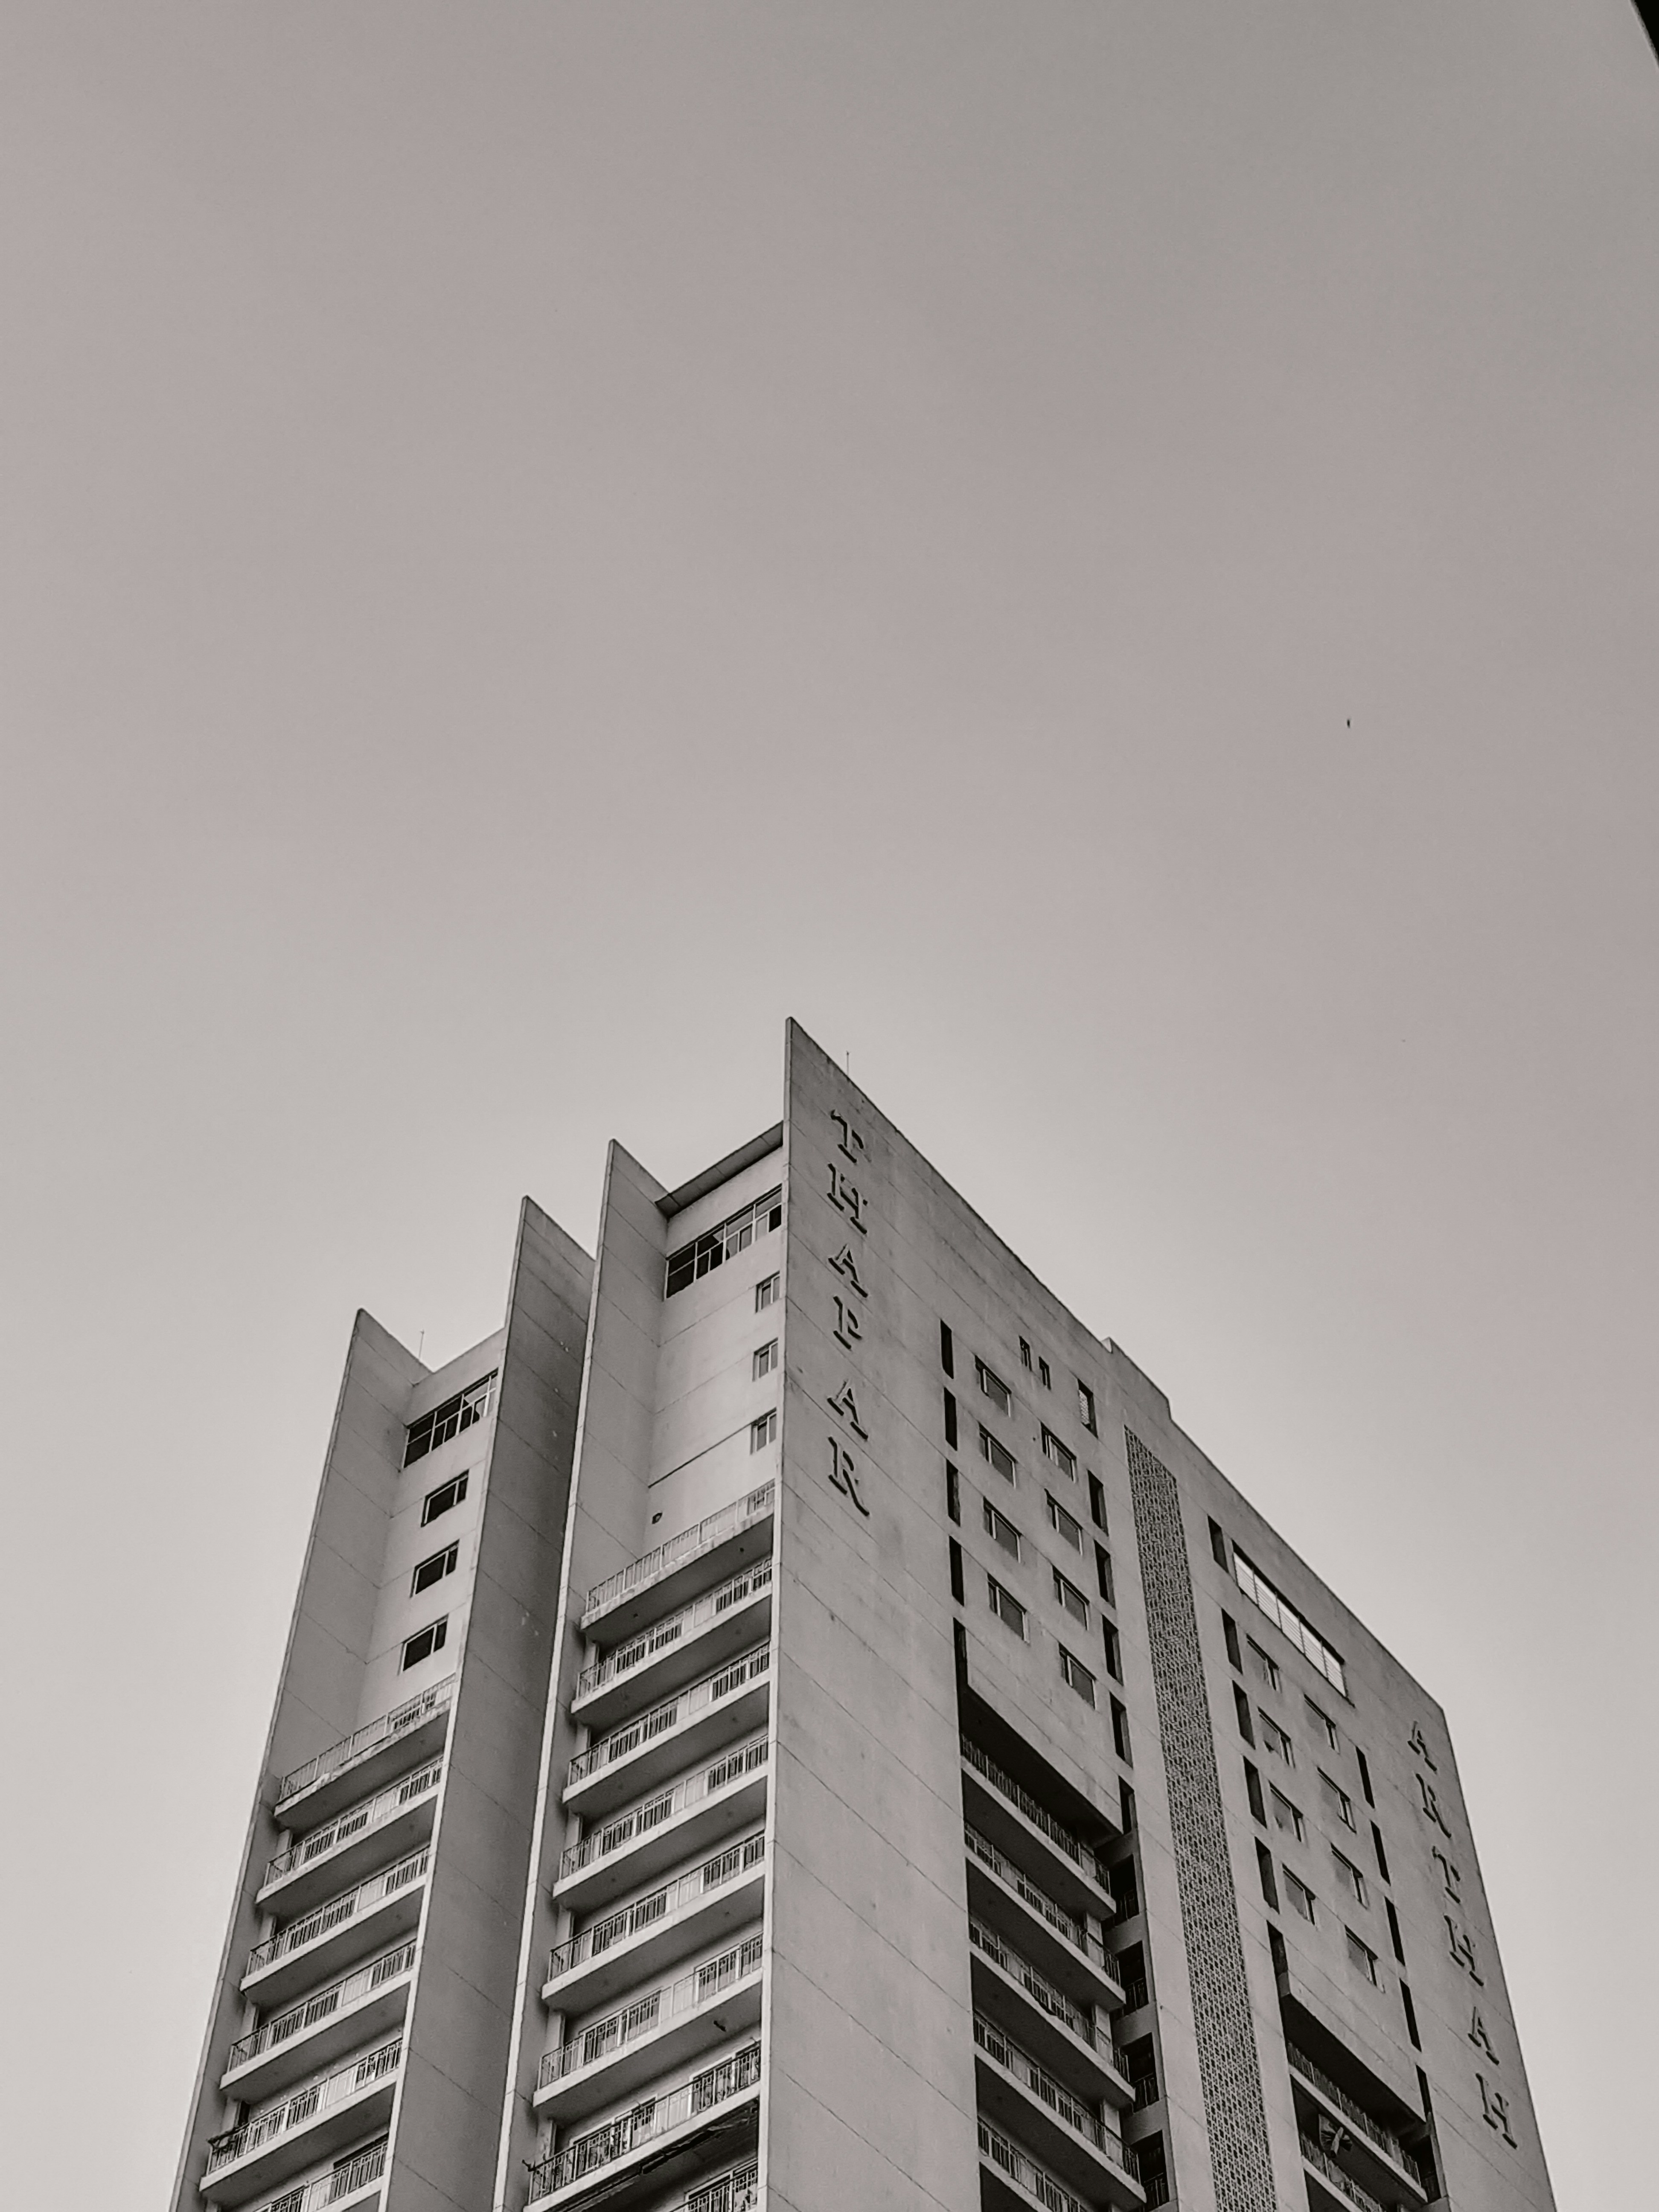 A black and white shot of buildings - apartments.